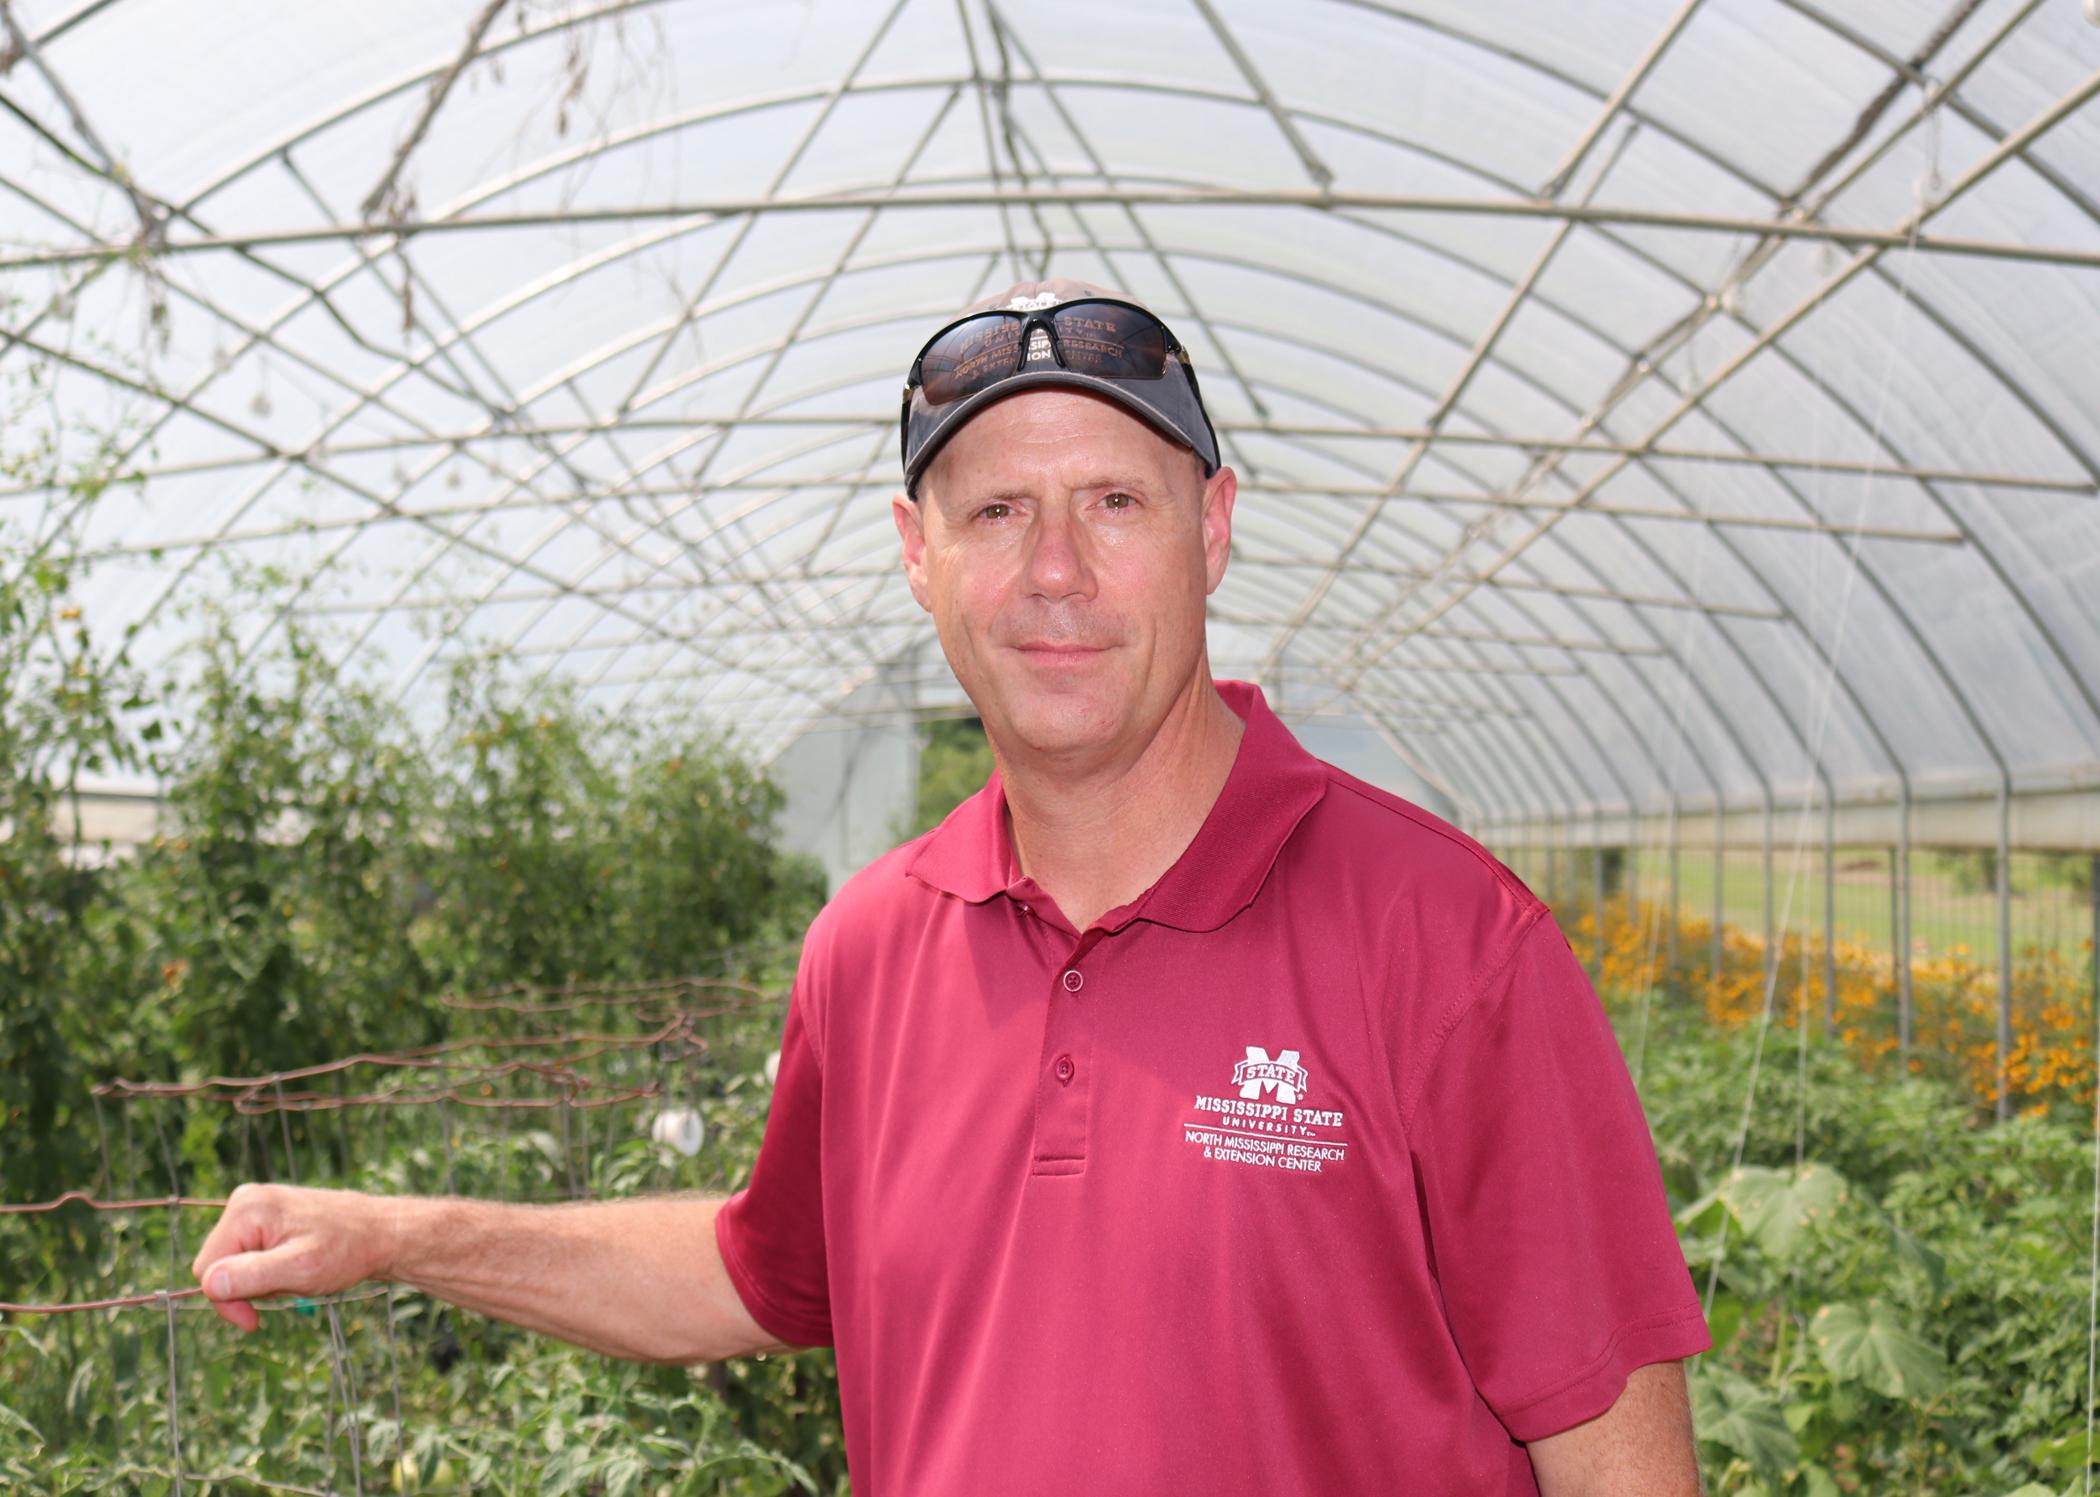 Man in a maroon shirt and baseball cap in a greenhouse.